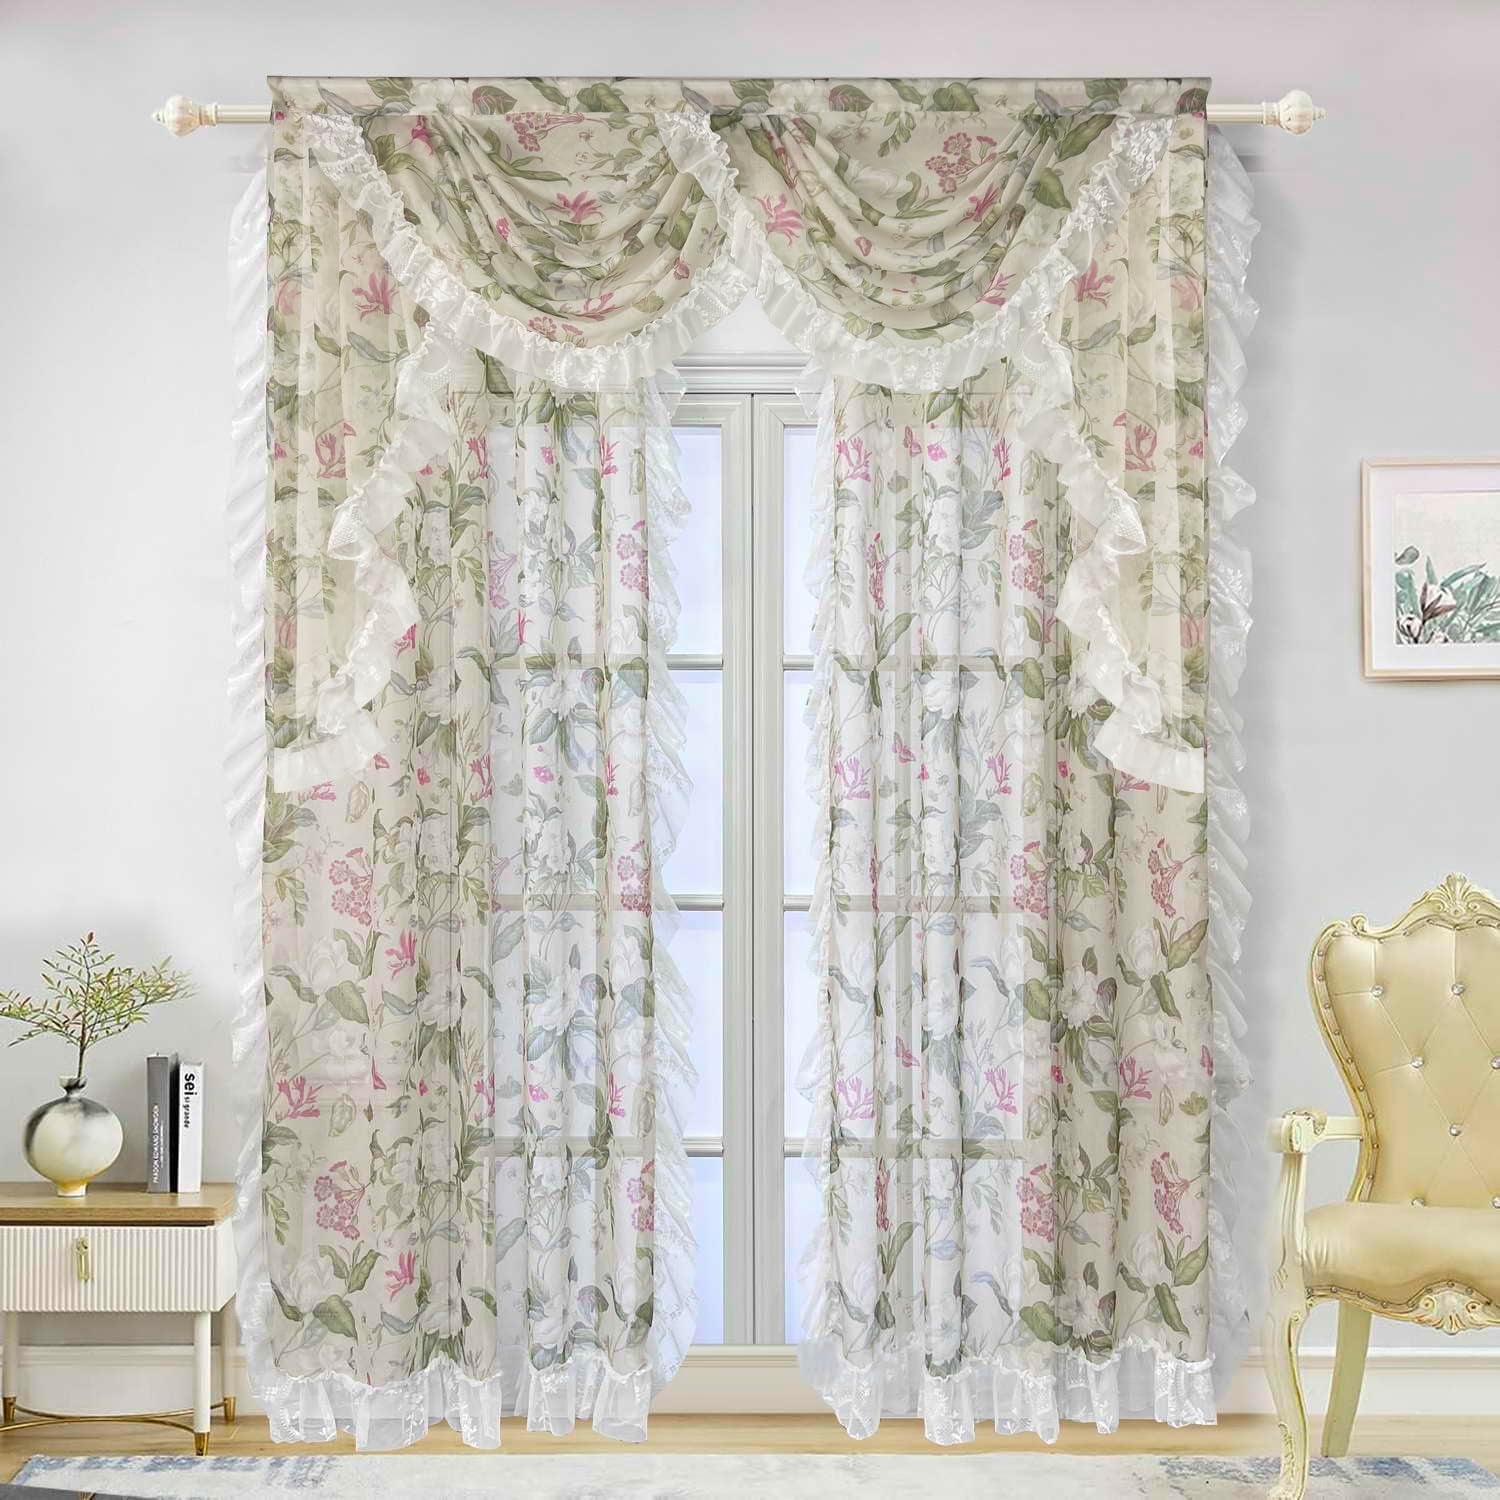 Elegant Floral Sheer Swag Valance with Lace Ruffles Luxury Beige Printed Sheer Valance for Living Room Bedroom Rod Pocket Top 1 Panel (Beige,W118 Inch)